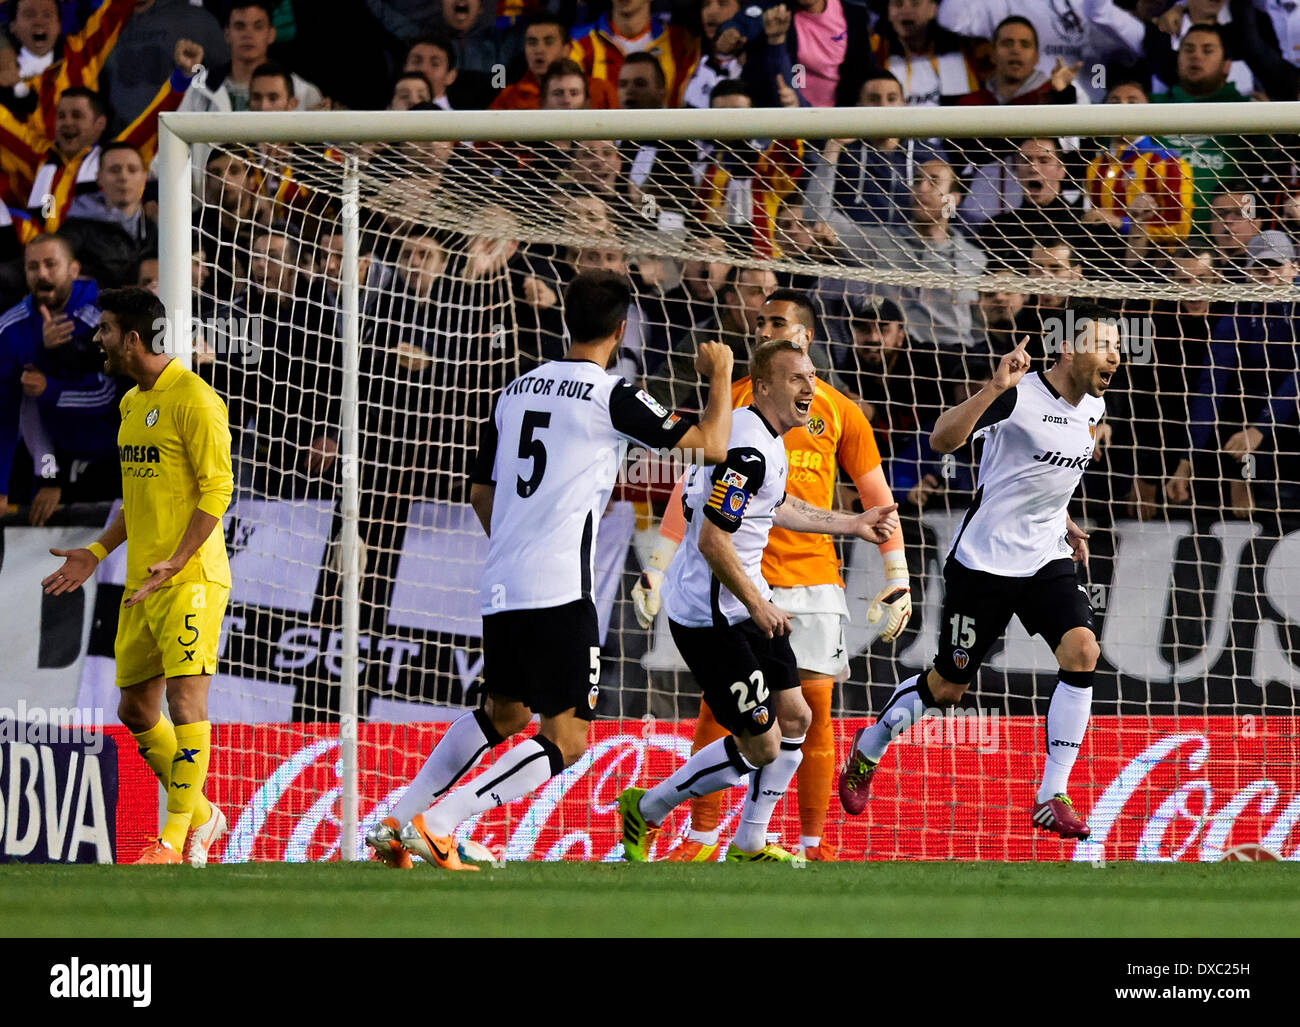 Valencia, Spain. 23rd Mar, 2014. Forward Javi Fuego of Valencia CF (R) celebrates after scoring the second goal for his team during the La Liga Game between Valencia CF and Villarreal at Mestalla Stadium, Valencia © Action Plus Sports/Alamy Live News Stock Photo